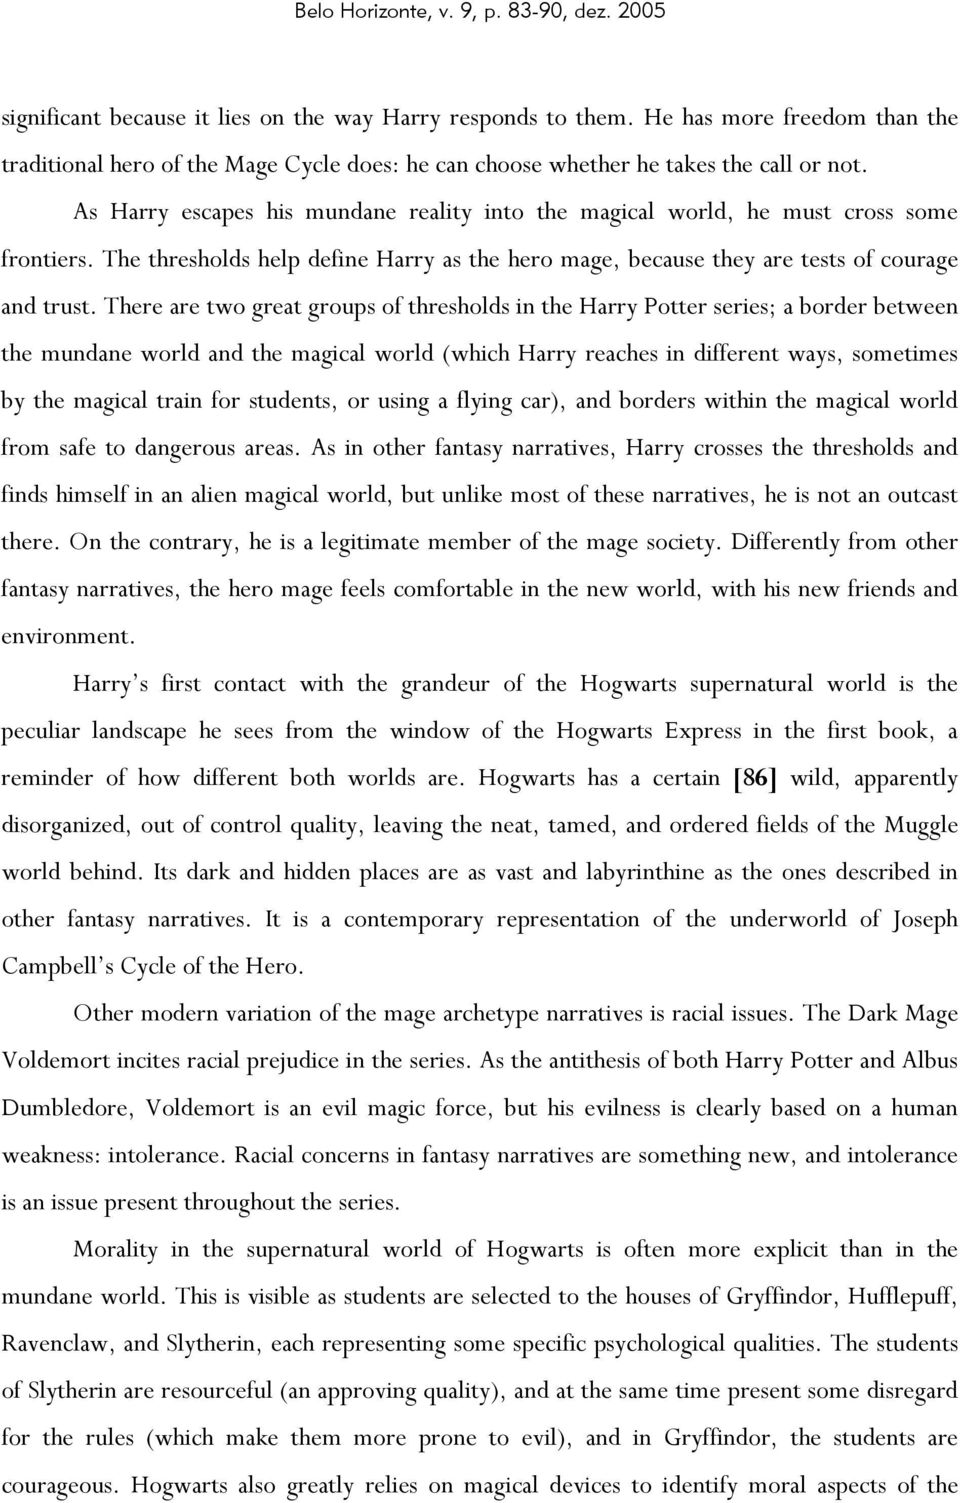 There are two great groups of thresholds in the Harry Potter series; a border between the mundane world and the magical world (which Harry reaches in different ways, sometimes by the magical train